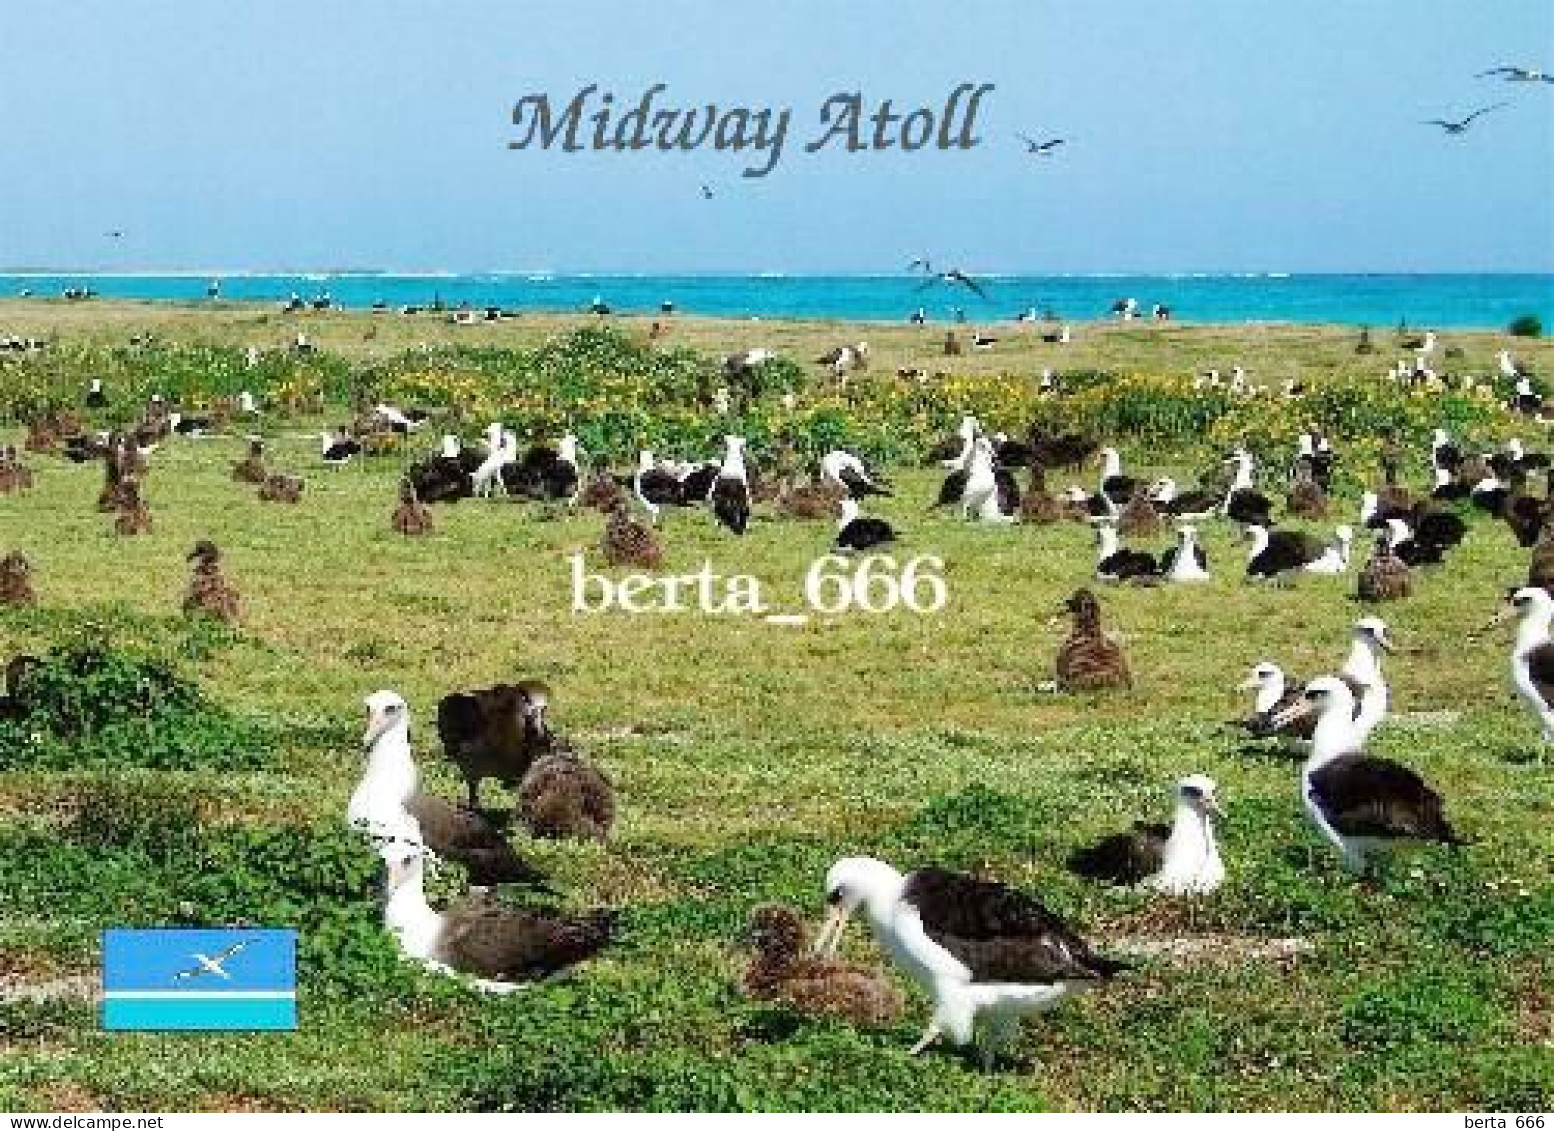 United States Midway Atoll Albatrosses New Postcard - Midway